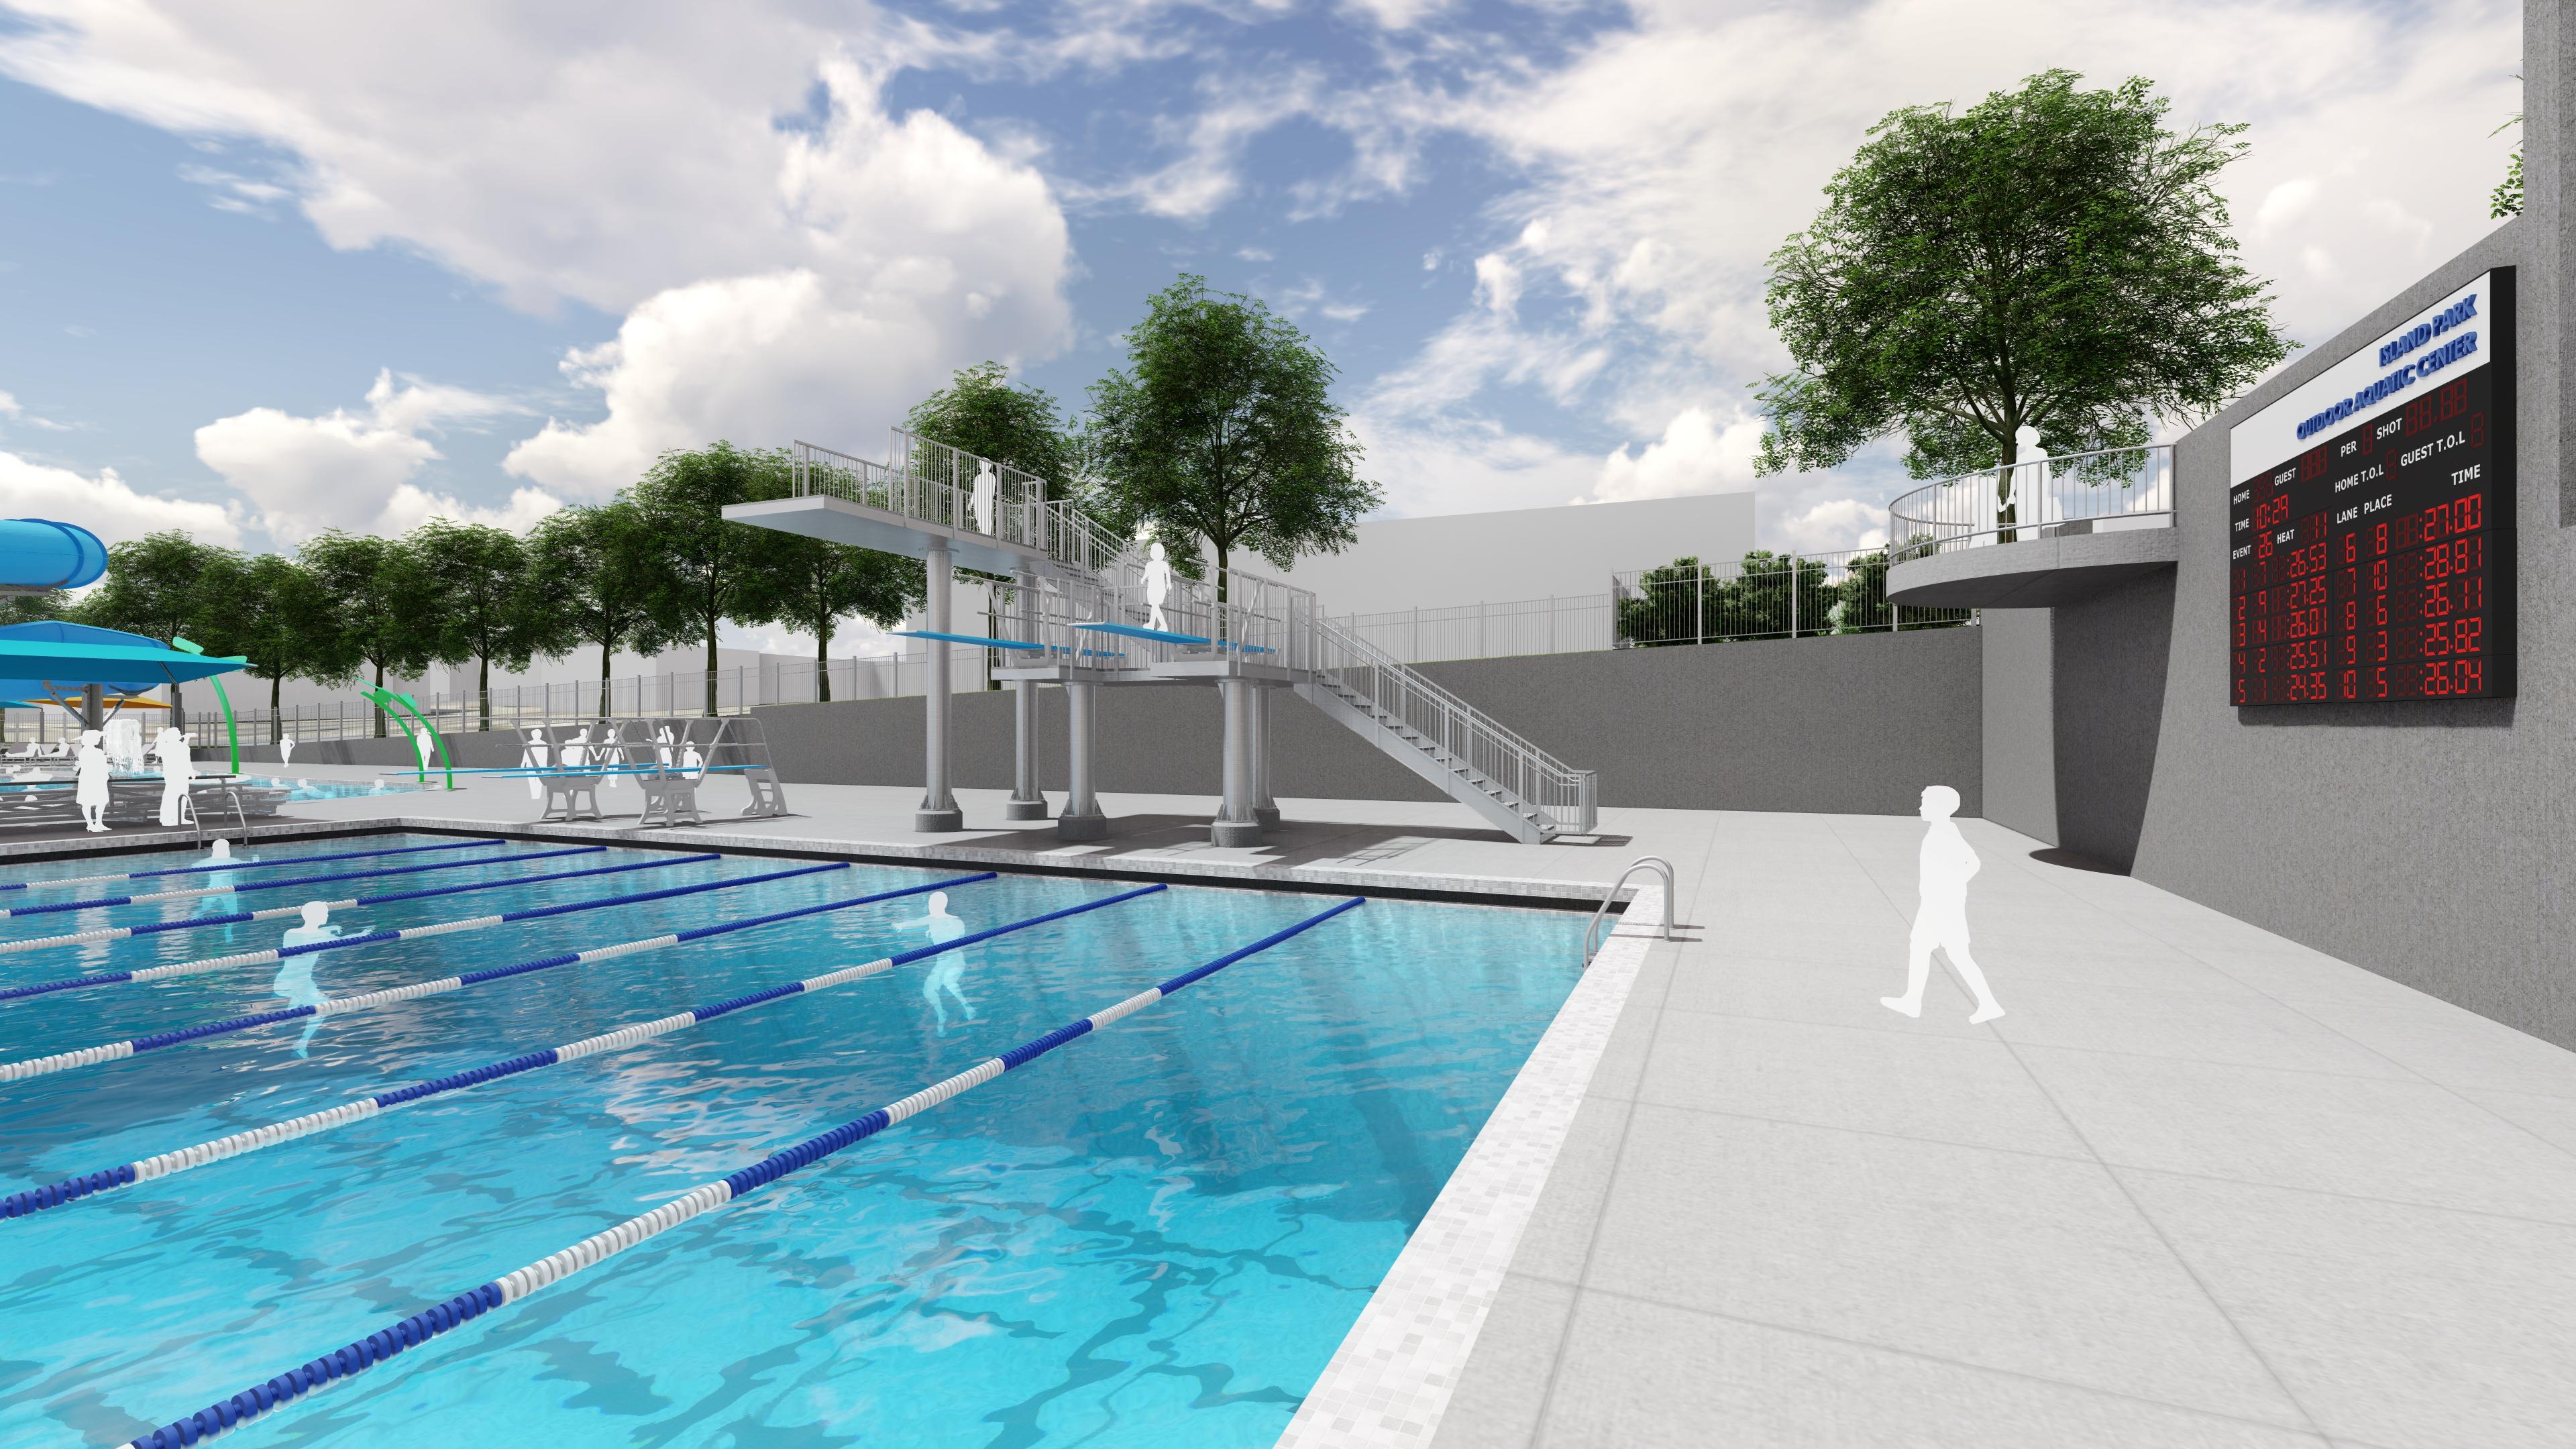 This image shows the renderings of Island Park Pool with a look at the competitive score clock and diving platforms